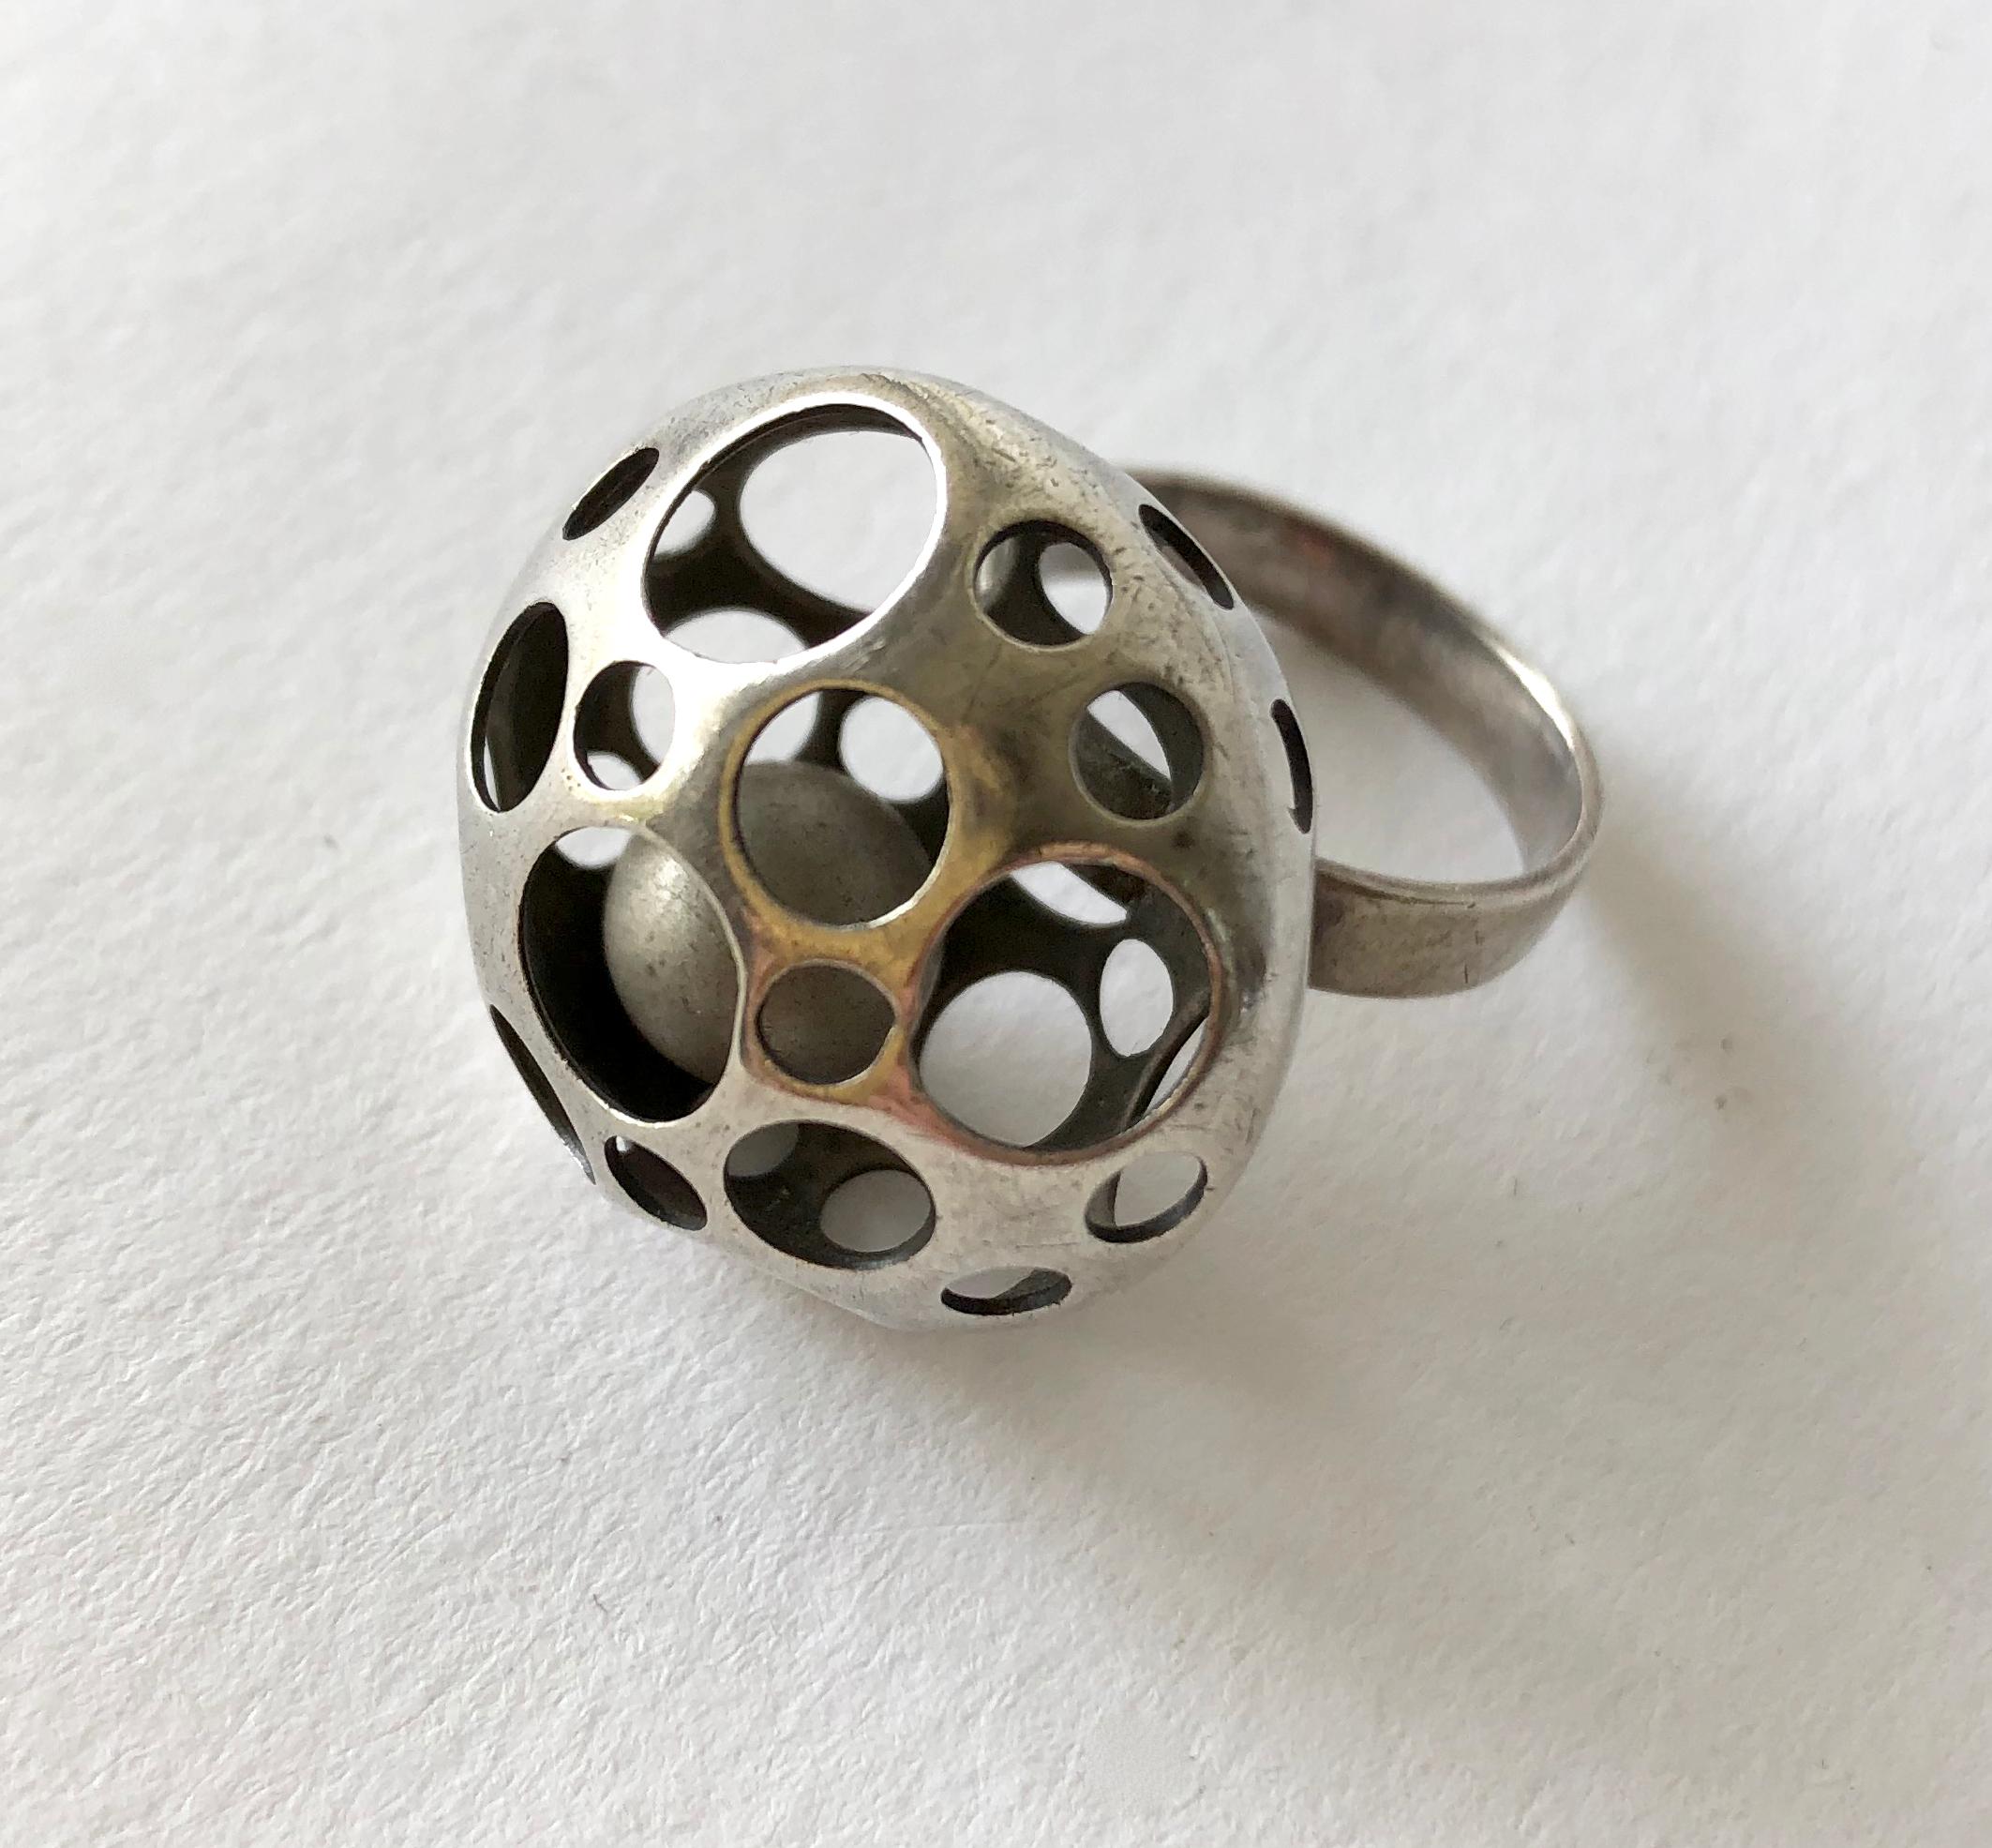 Perforated sterling silver ring containing a kinetic ball within created by Liisa Vitali of Finland.  Ring is a finger size 6 3/4 and is signed on the shank with Finnish hallmarks, M7 (1965).  In very good vintage condition and retains original